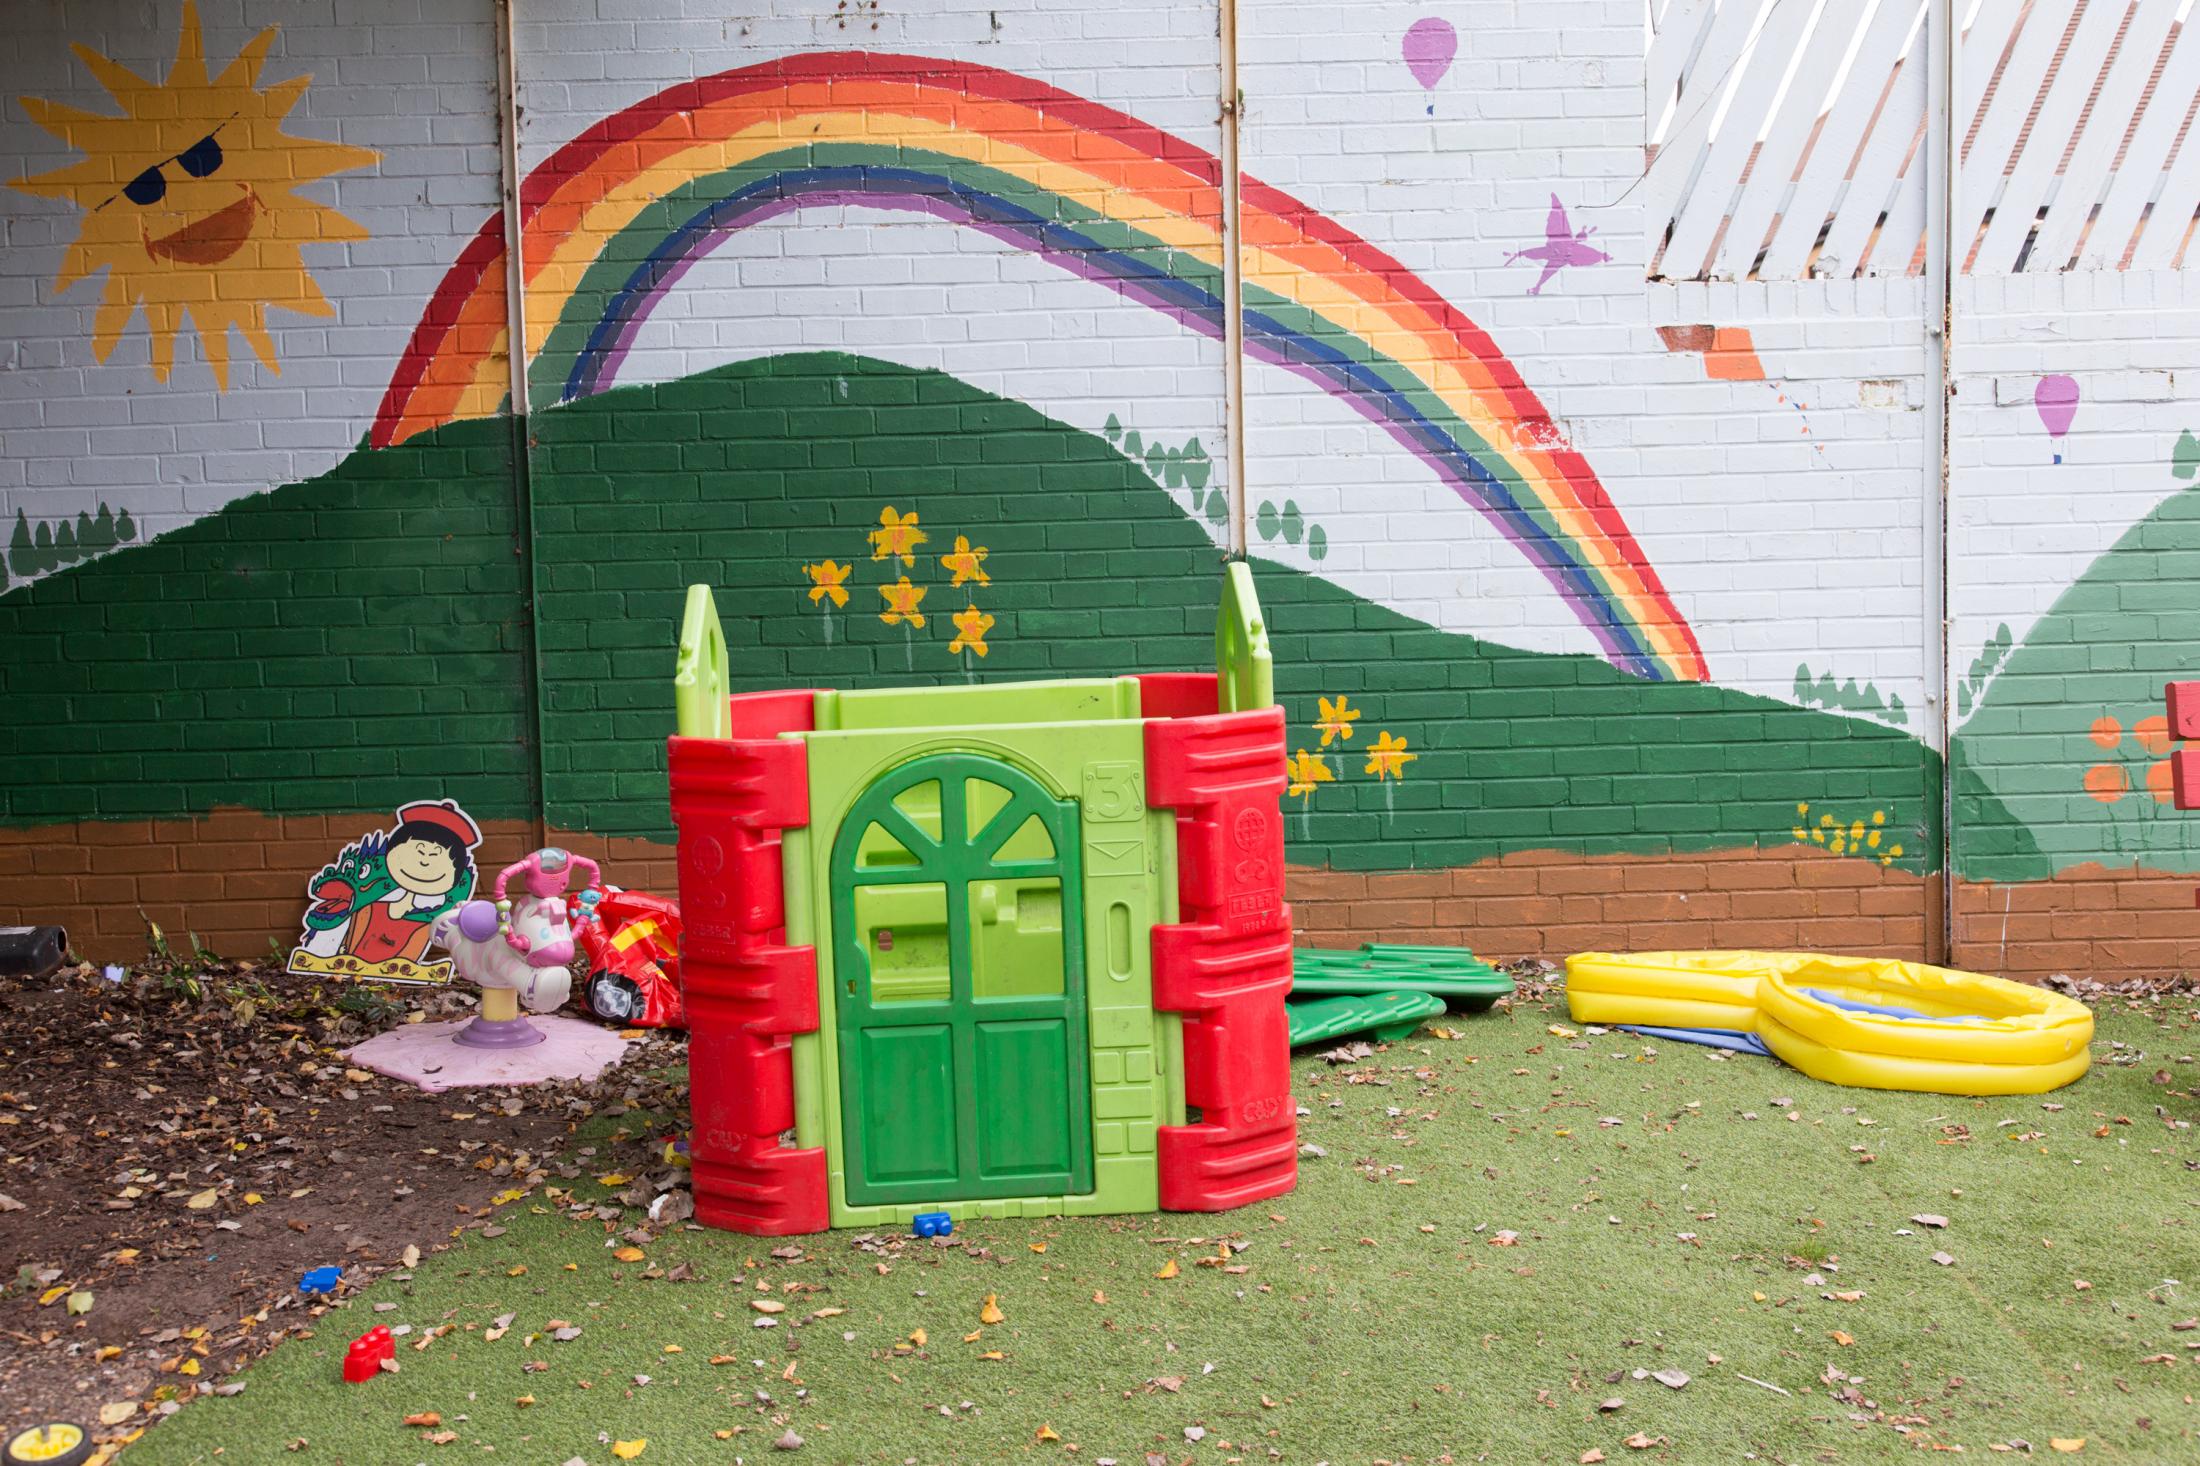 Children&rsquo;s play area, a refuge in the Black Country, UK 2015